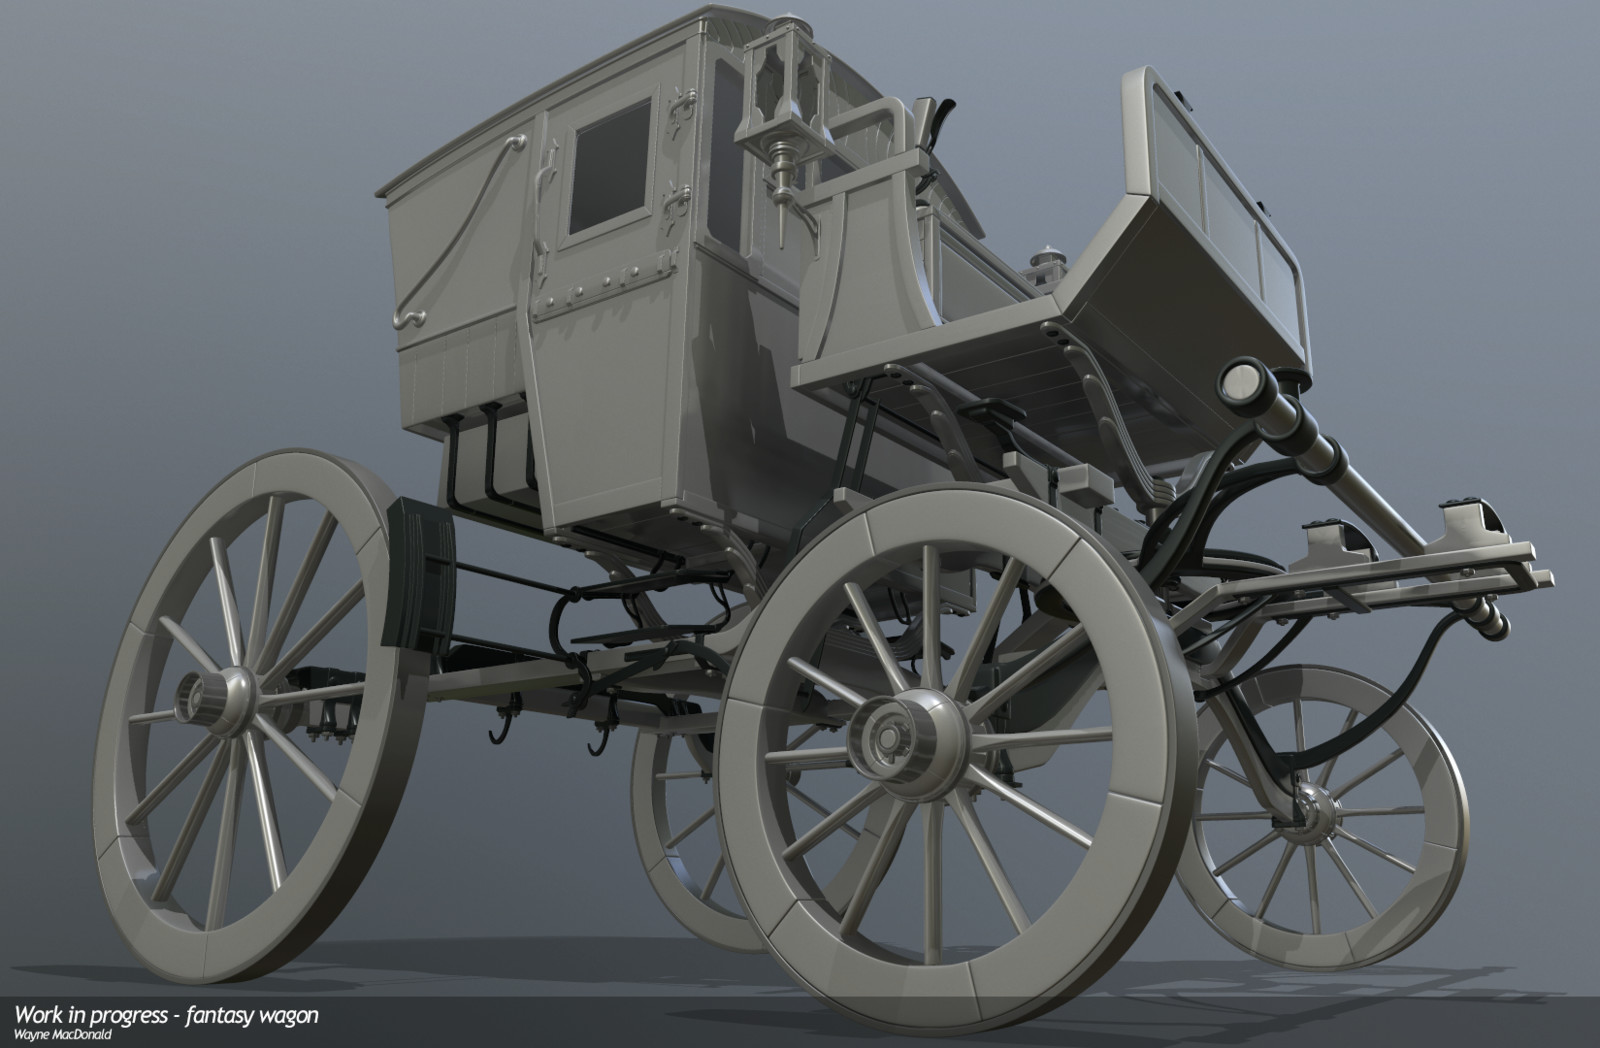 Wagon WIP - had fun getting a somewhat believable looking working undercarriage.